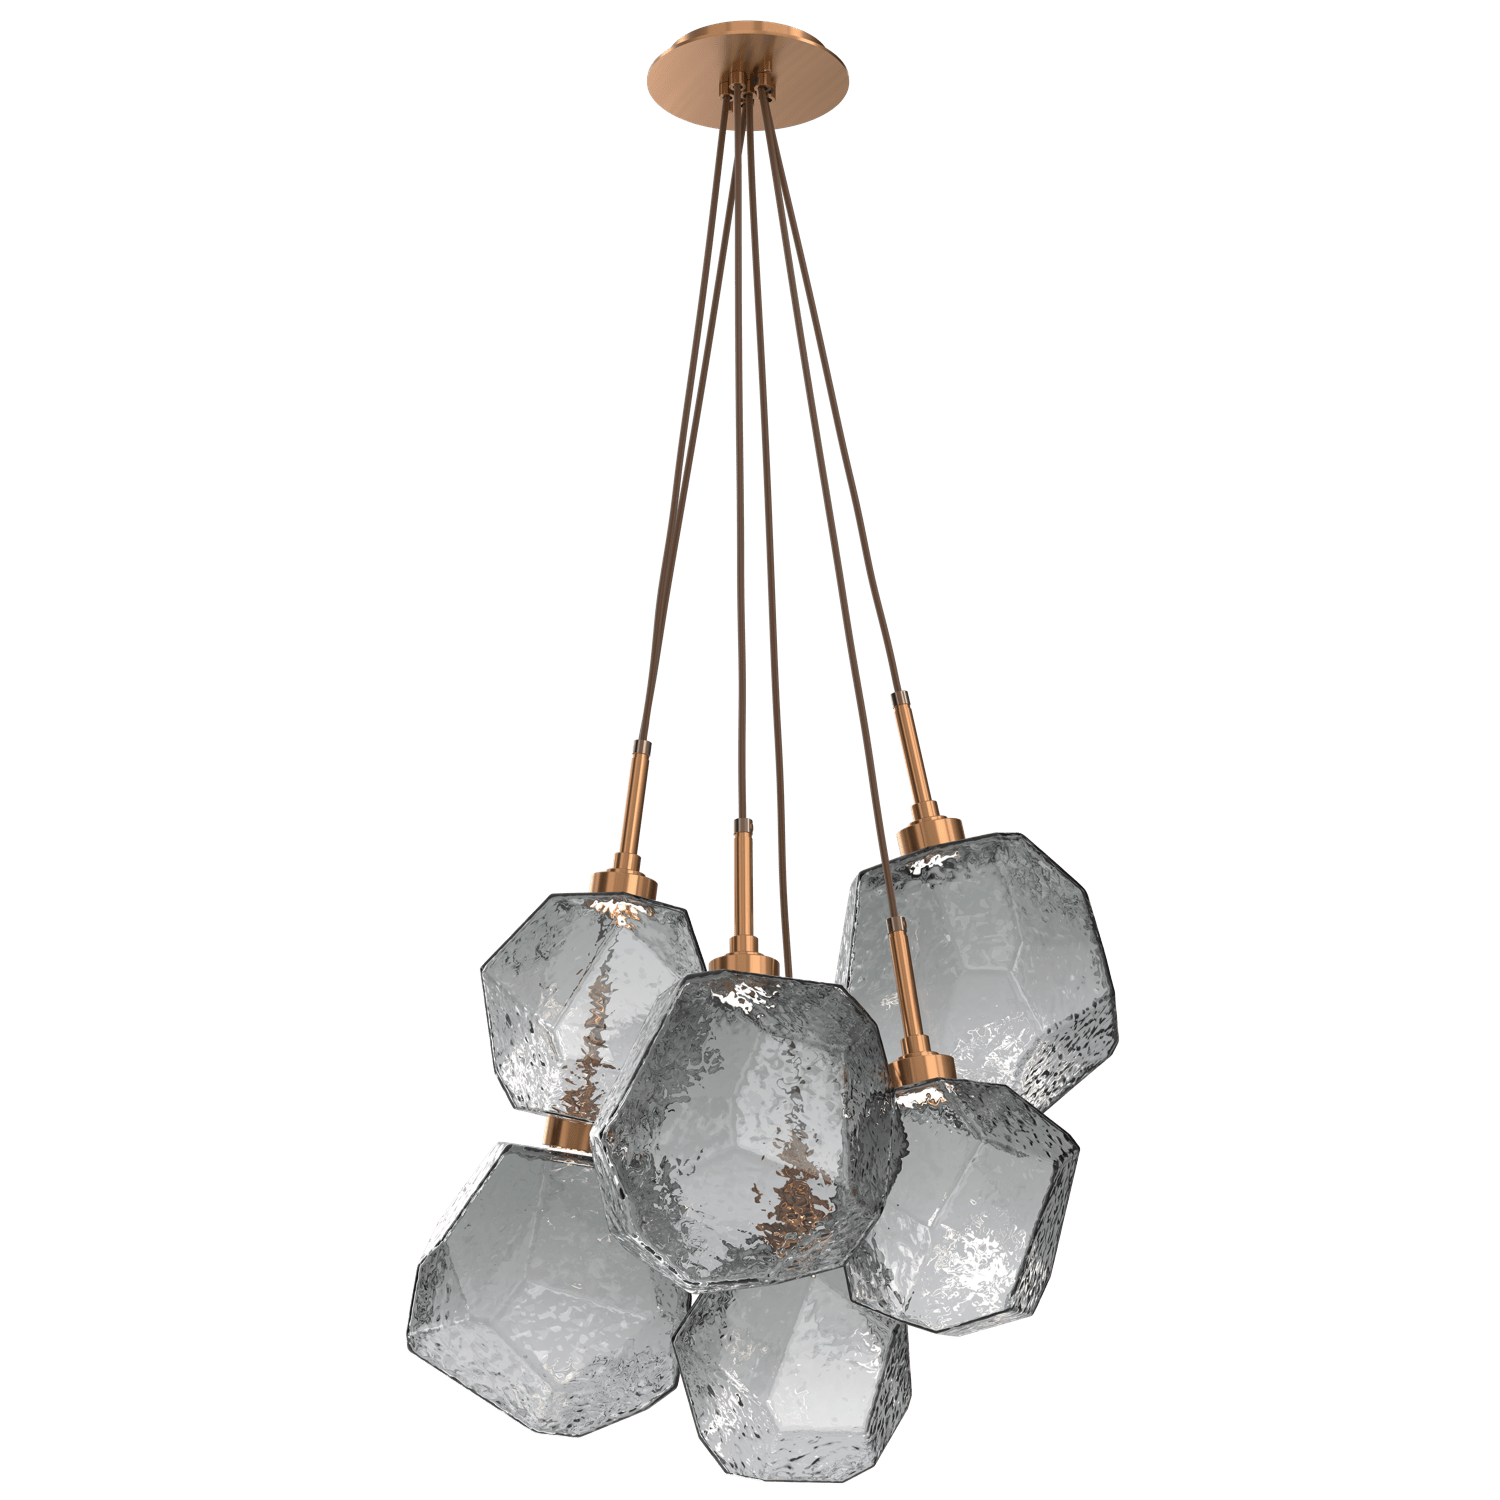 CHB0039-0F-RB-S-Hammerton-Studio-Gem-6-light-cluster-pendant-light-with-oil-rubbed-bronze-finish-and-smoke-blown-glass-shades-and-LED-lamping